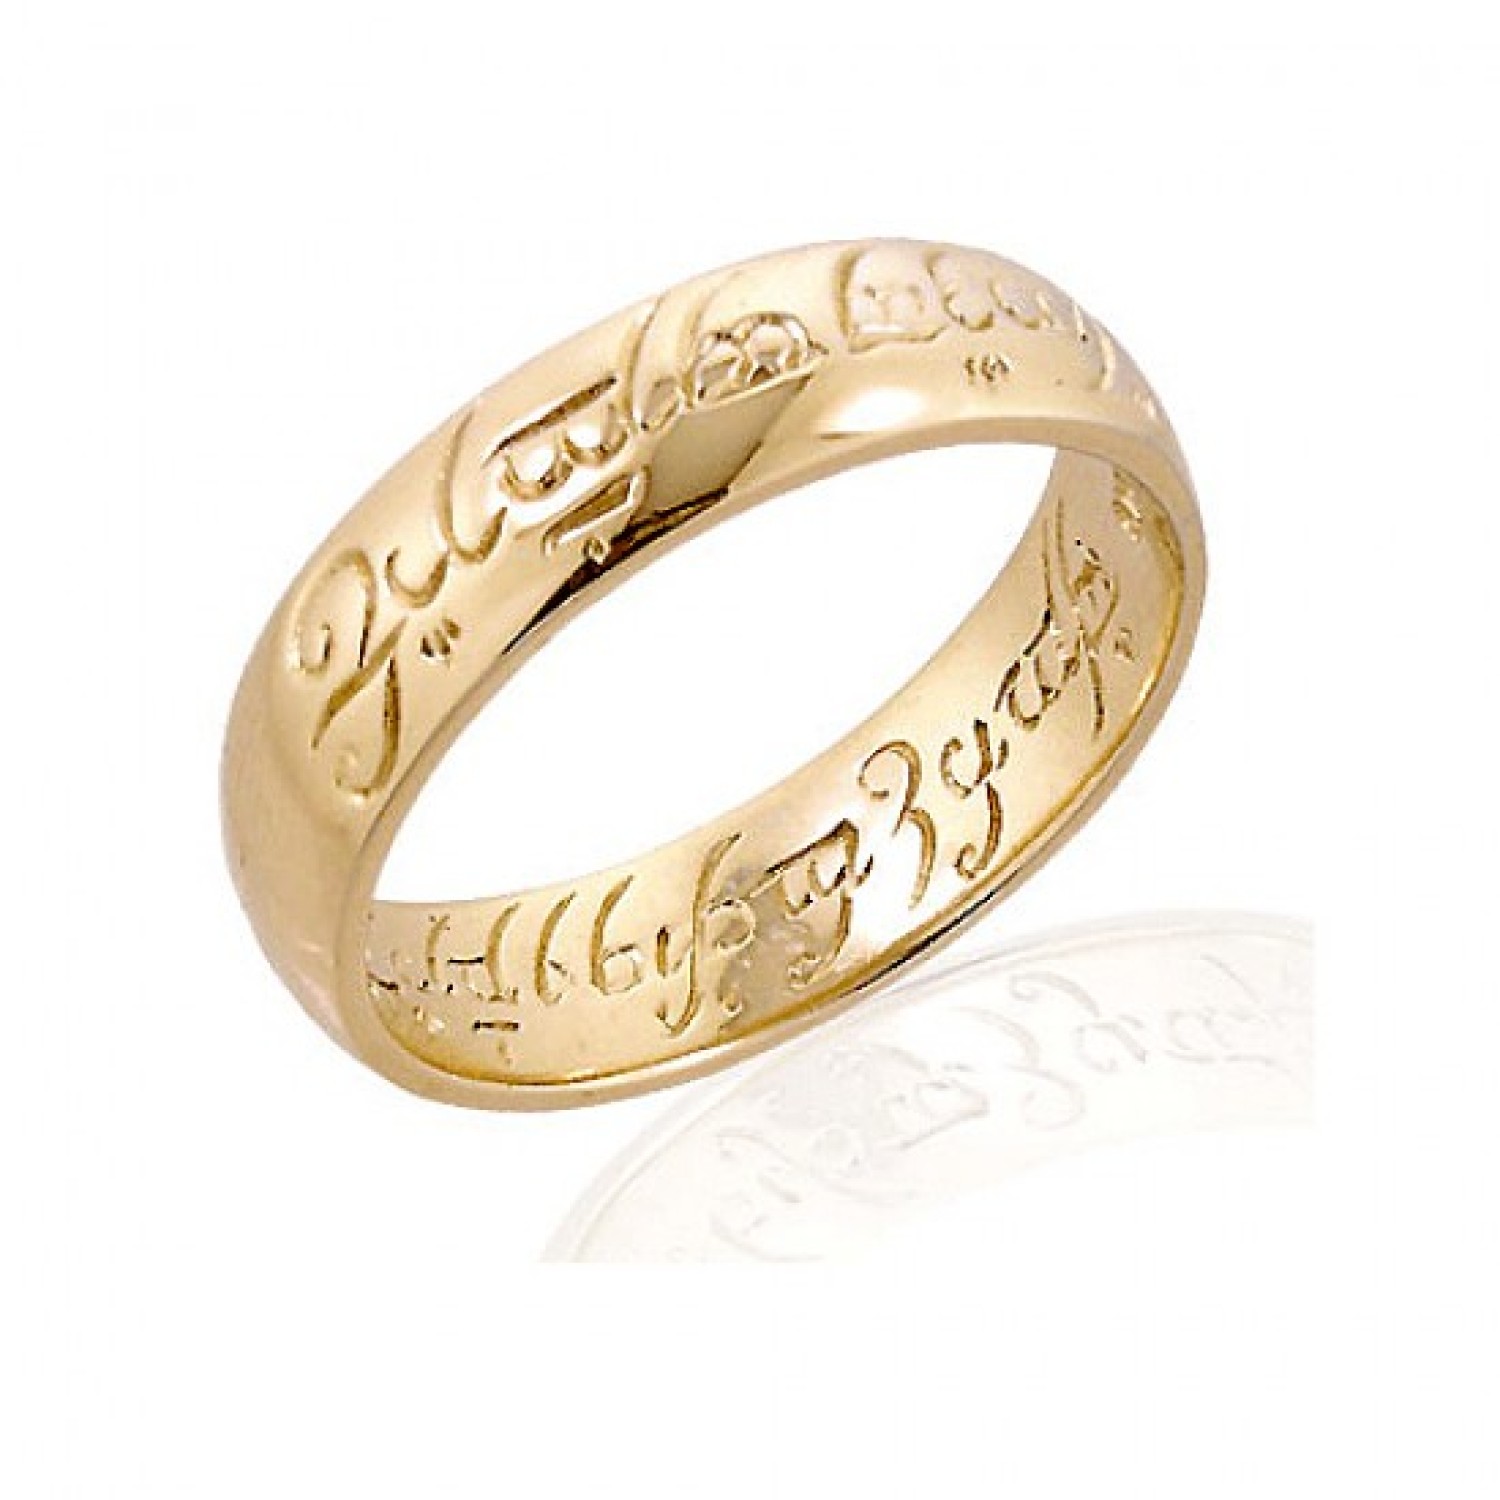 Official Lord Of The Rings Ring of Power in 9K Gold. One ring to rule them all,One ring to find them,One ring to bring them all and in the darkness bind them. Engraved with Elvish Runes in black anodised Elvish Script. The only Official Lord of the Rings 